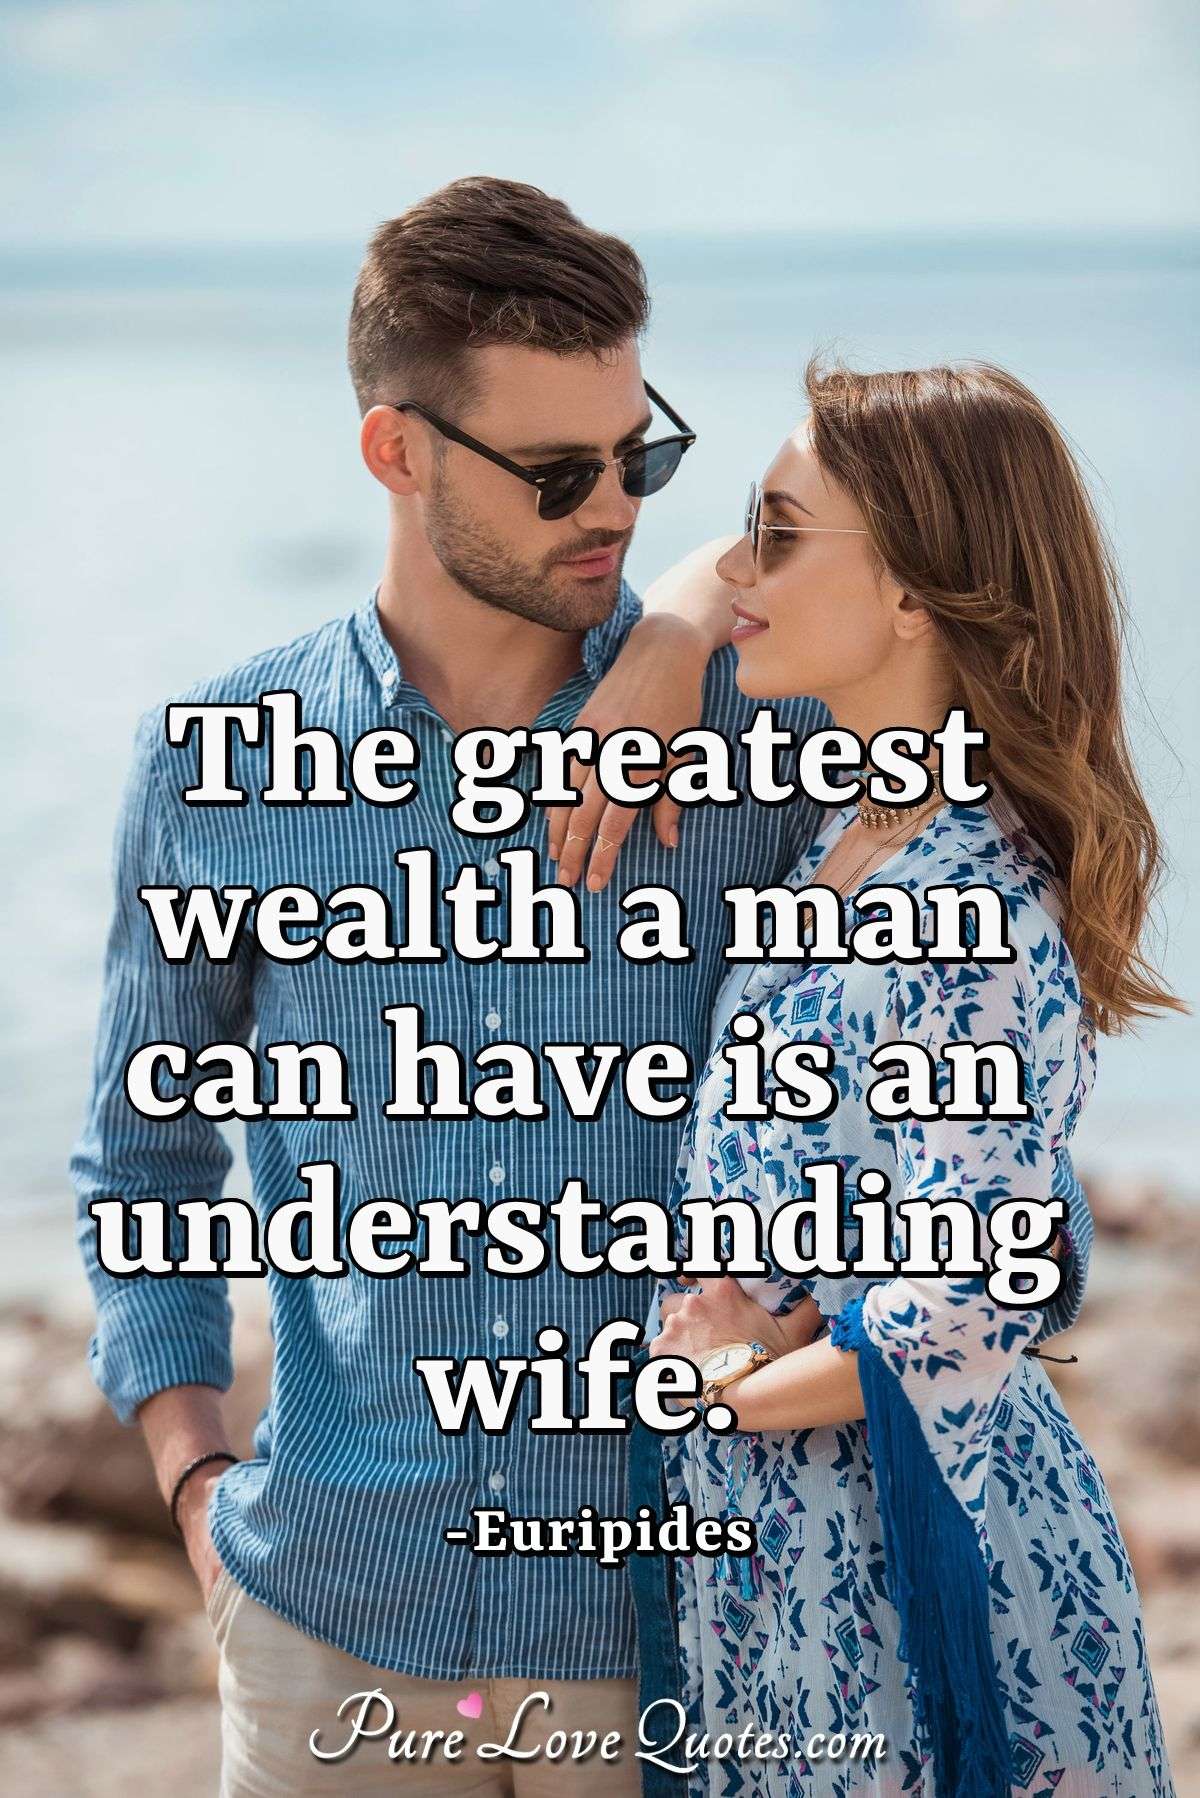 The greatest wealth a man can have is an understanding wife. - Euripides